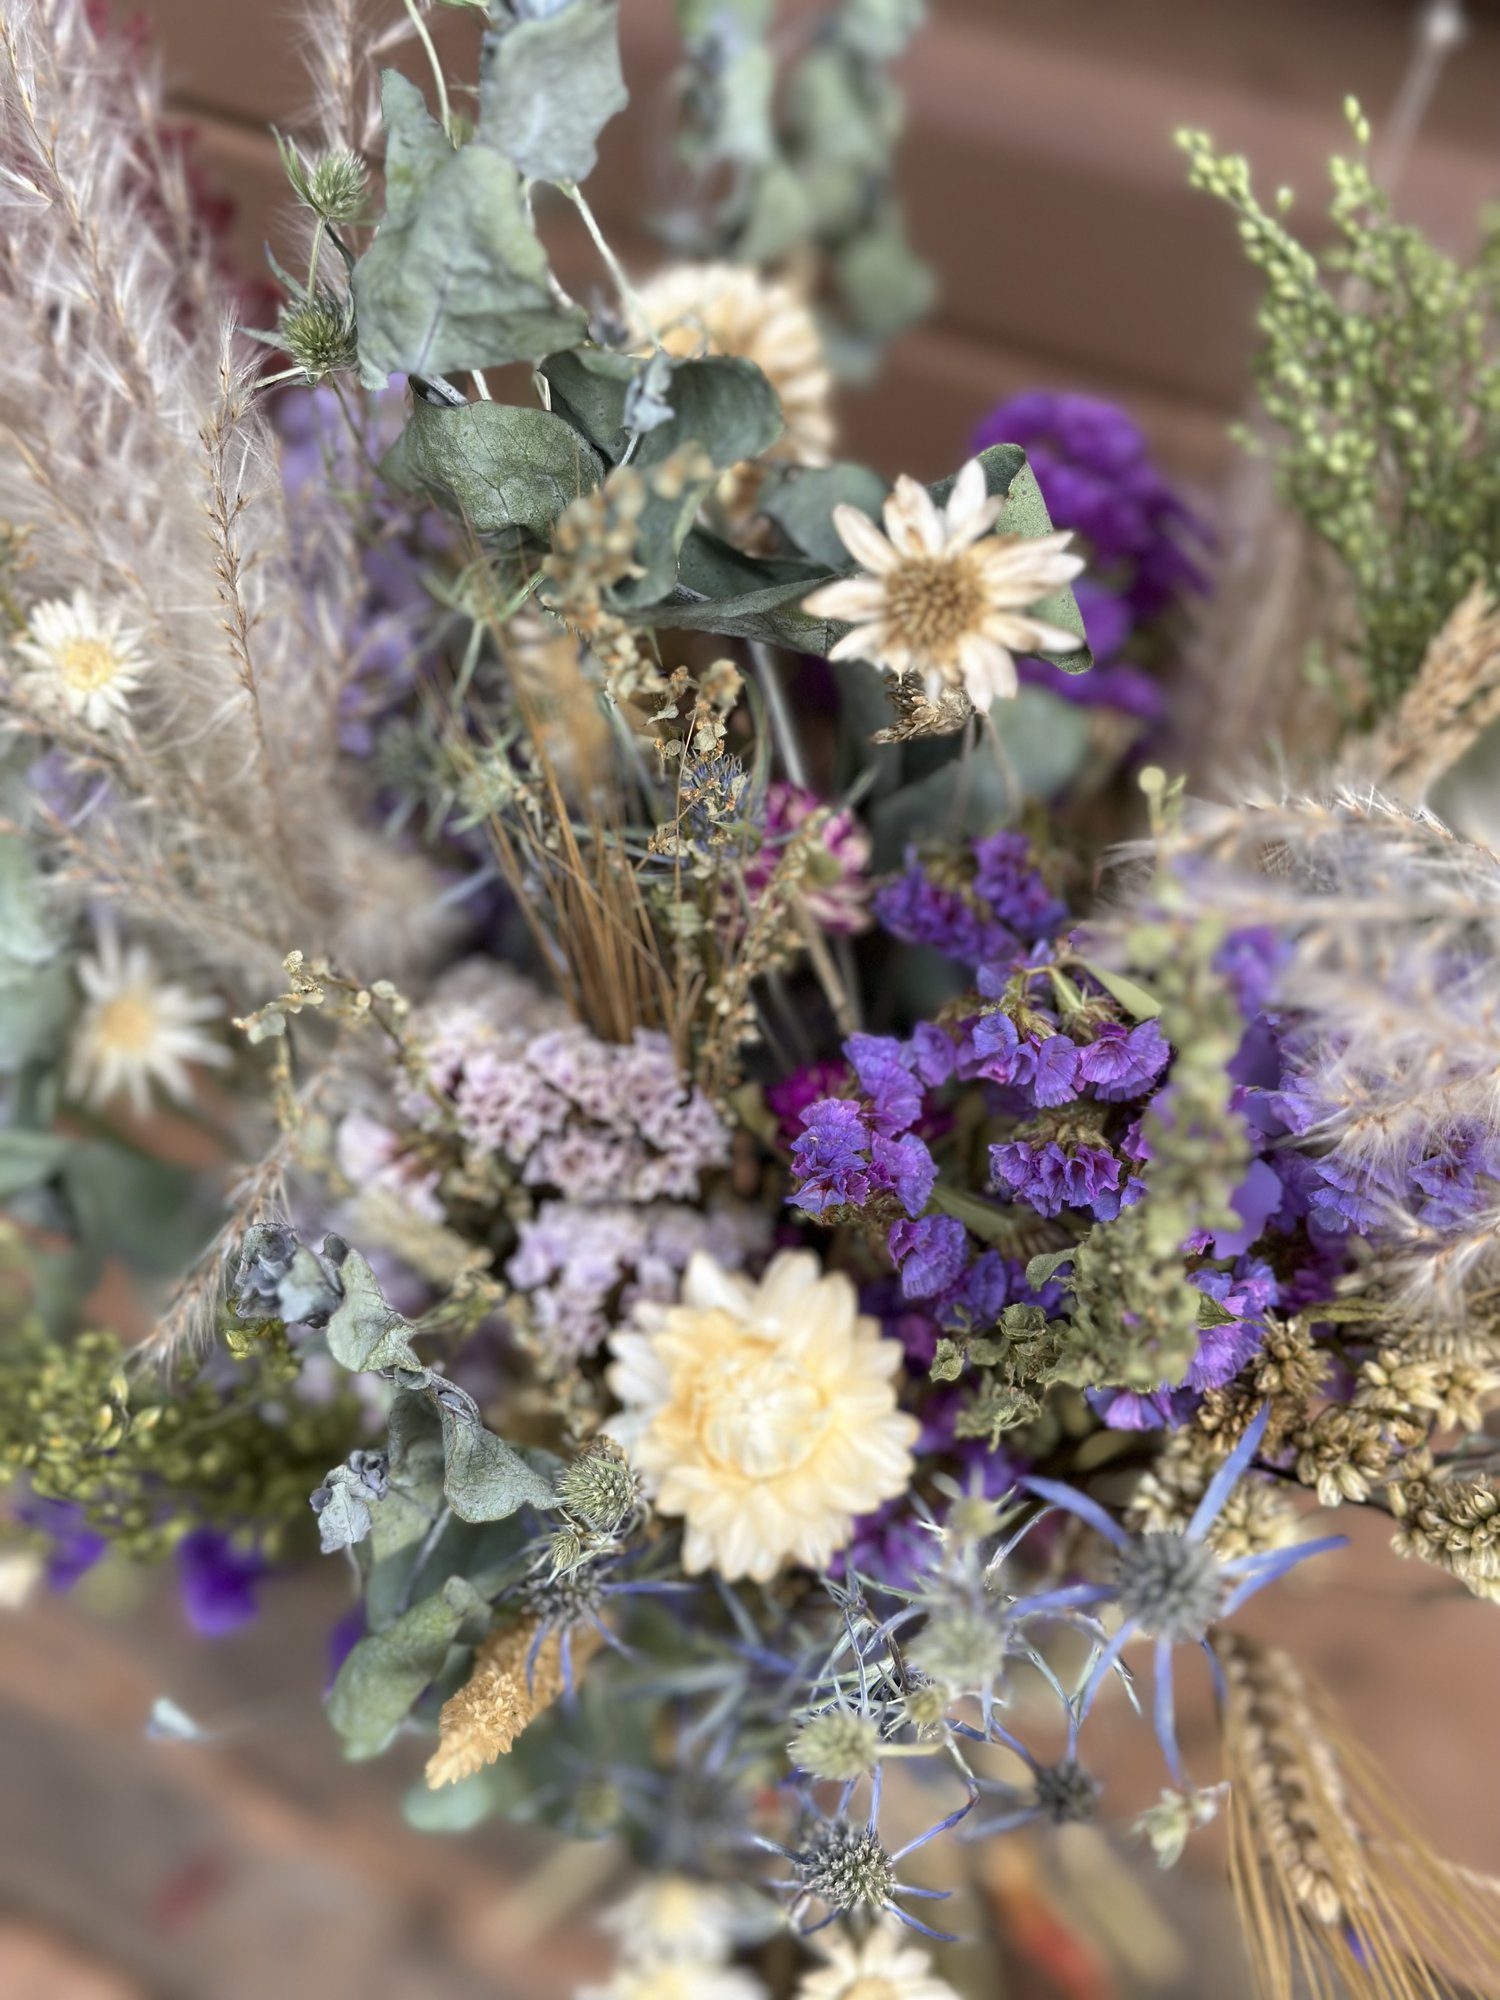 Natural Everlasting Dried Flowers — Hometown Flower Co.